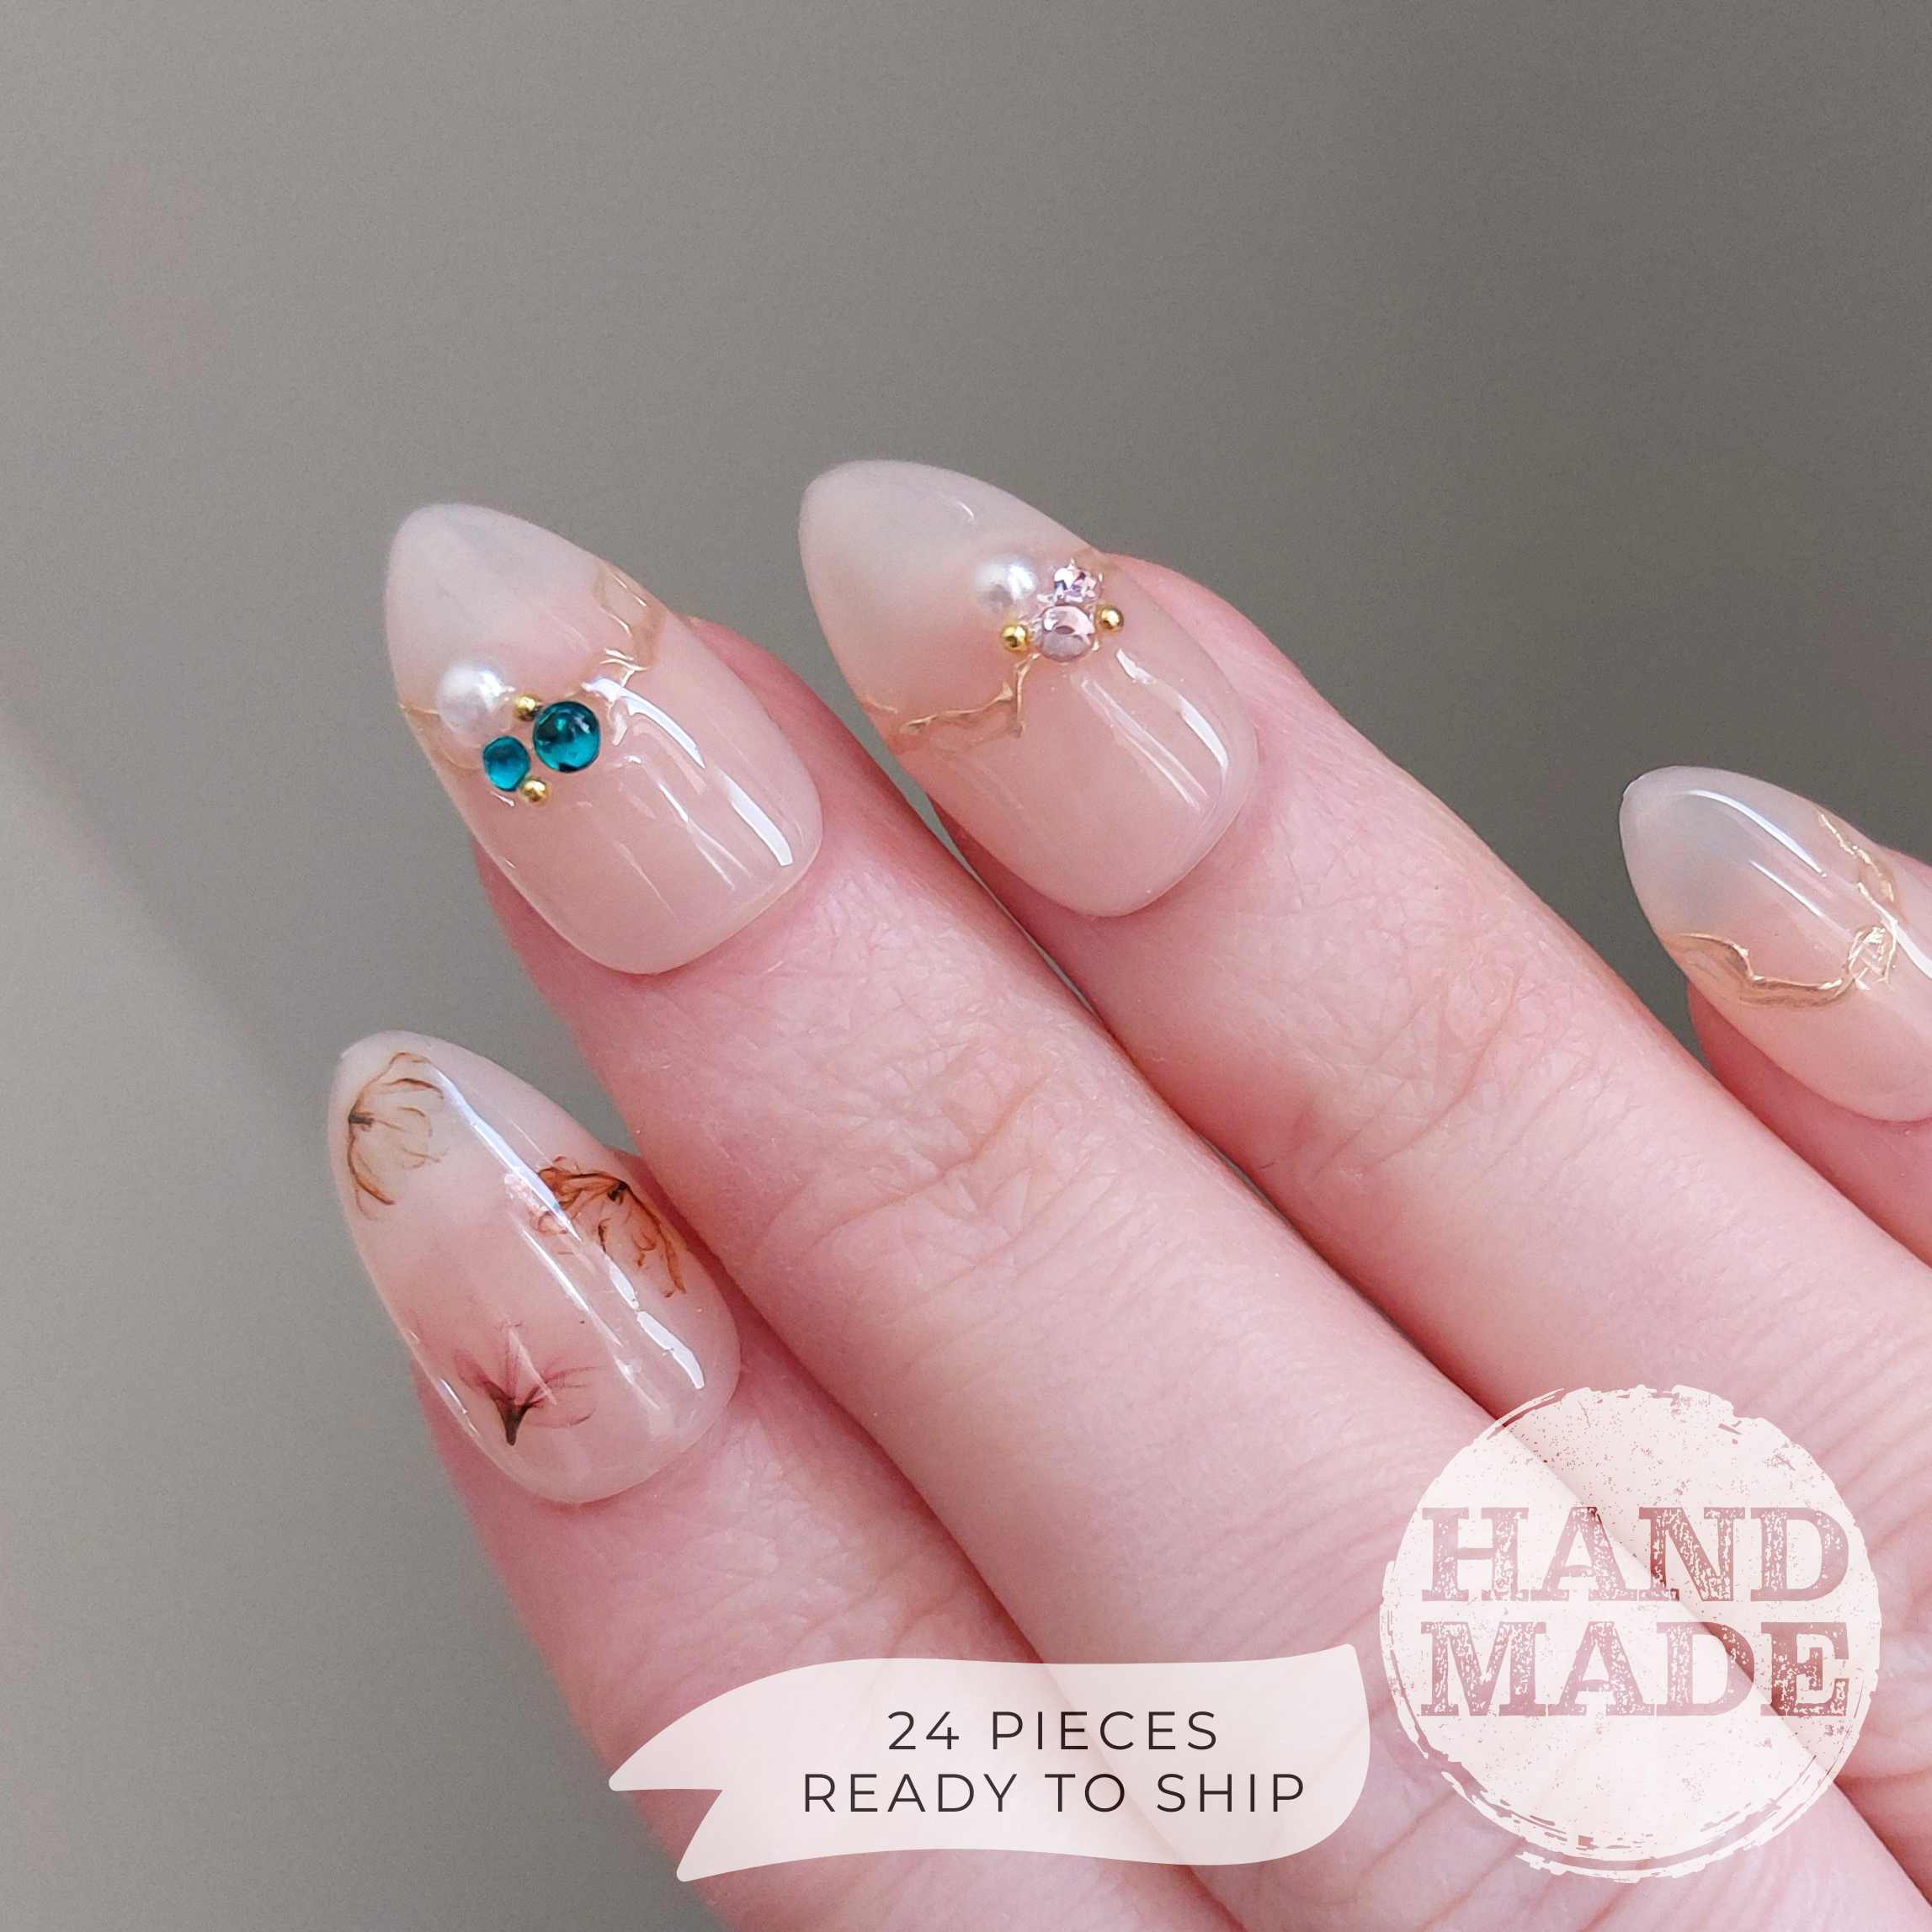 Floral press on nails, flower nails with dainty flowers, colorful gems, watercolor florals, and gold accents. FancyB handmade nails in short almond.